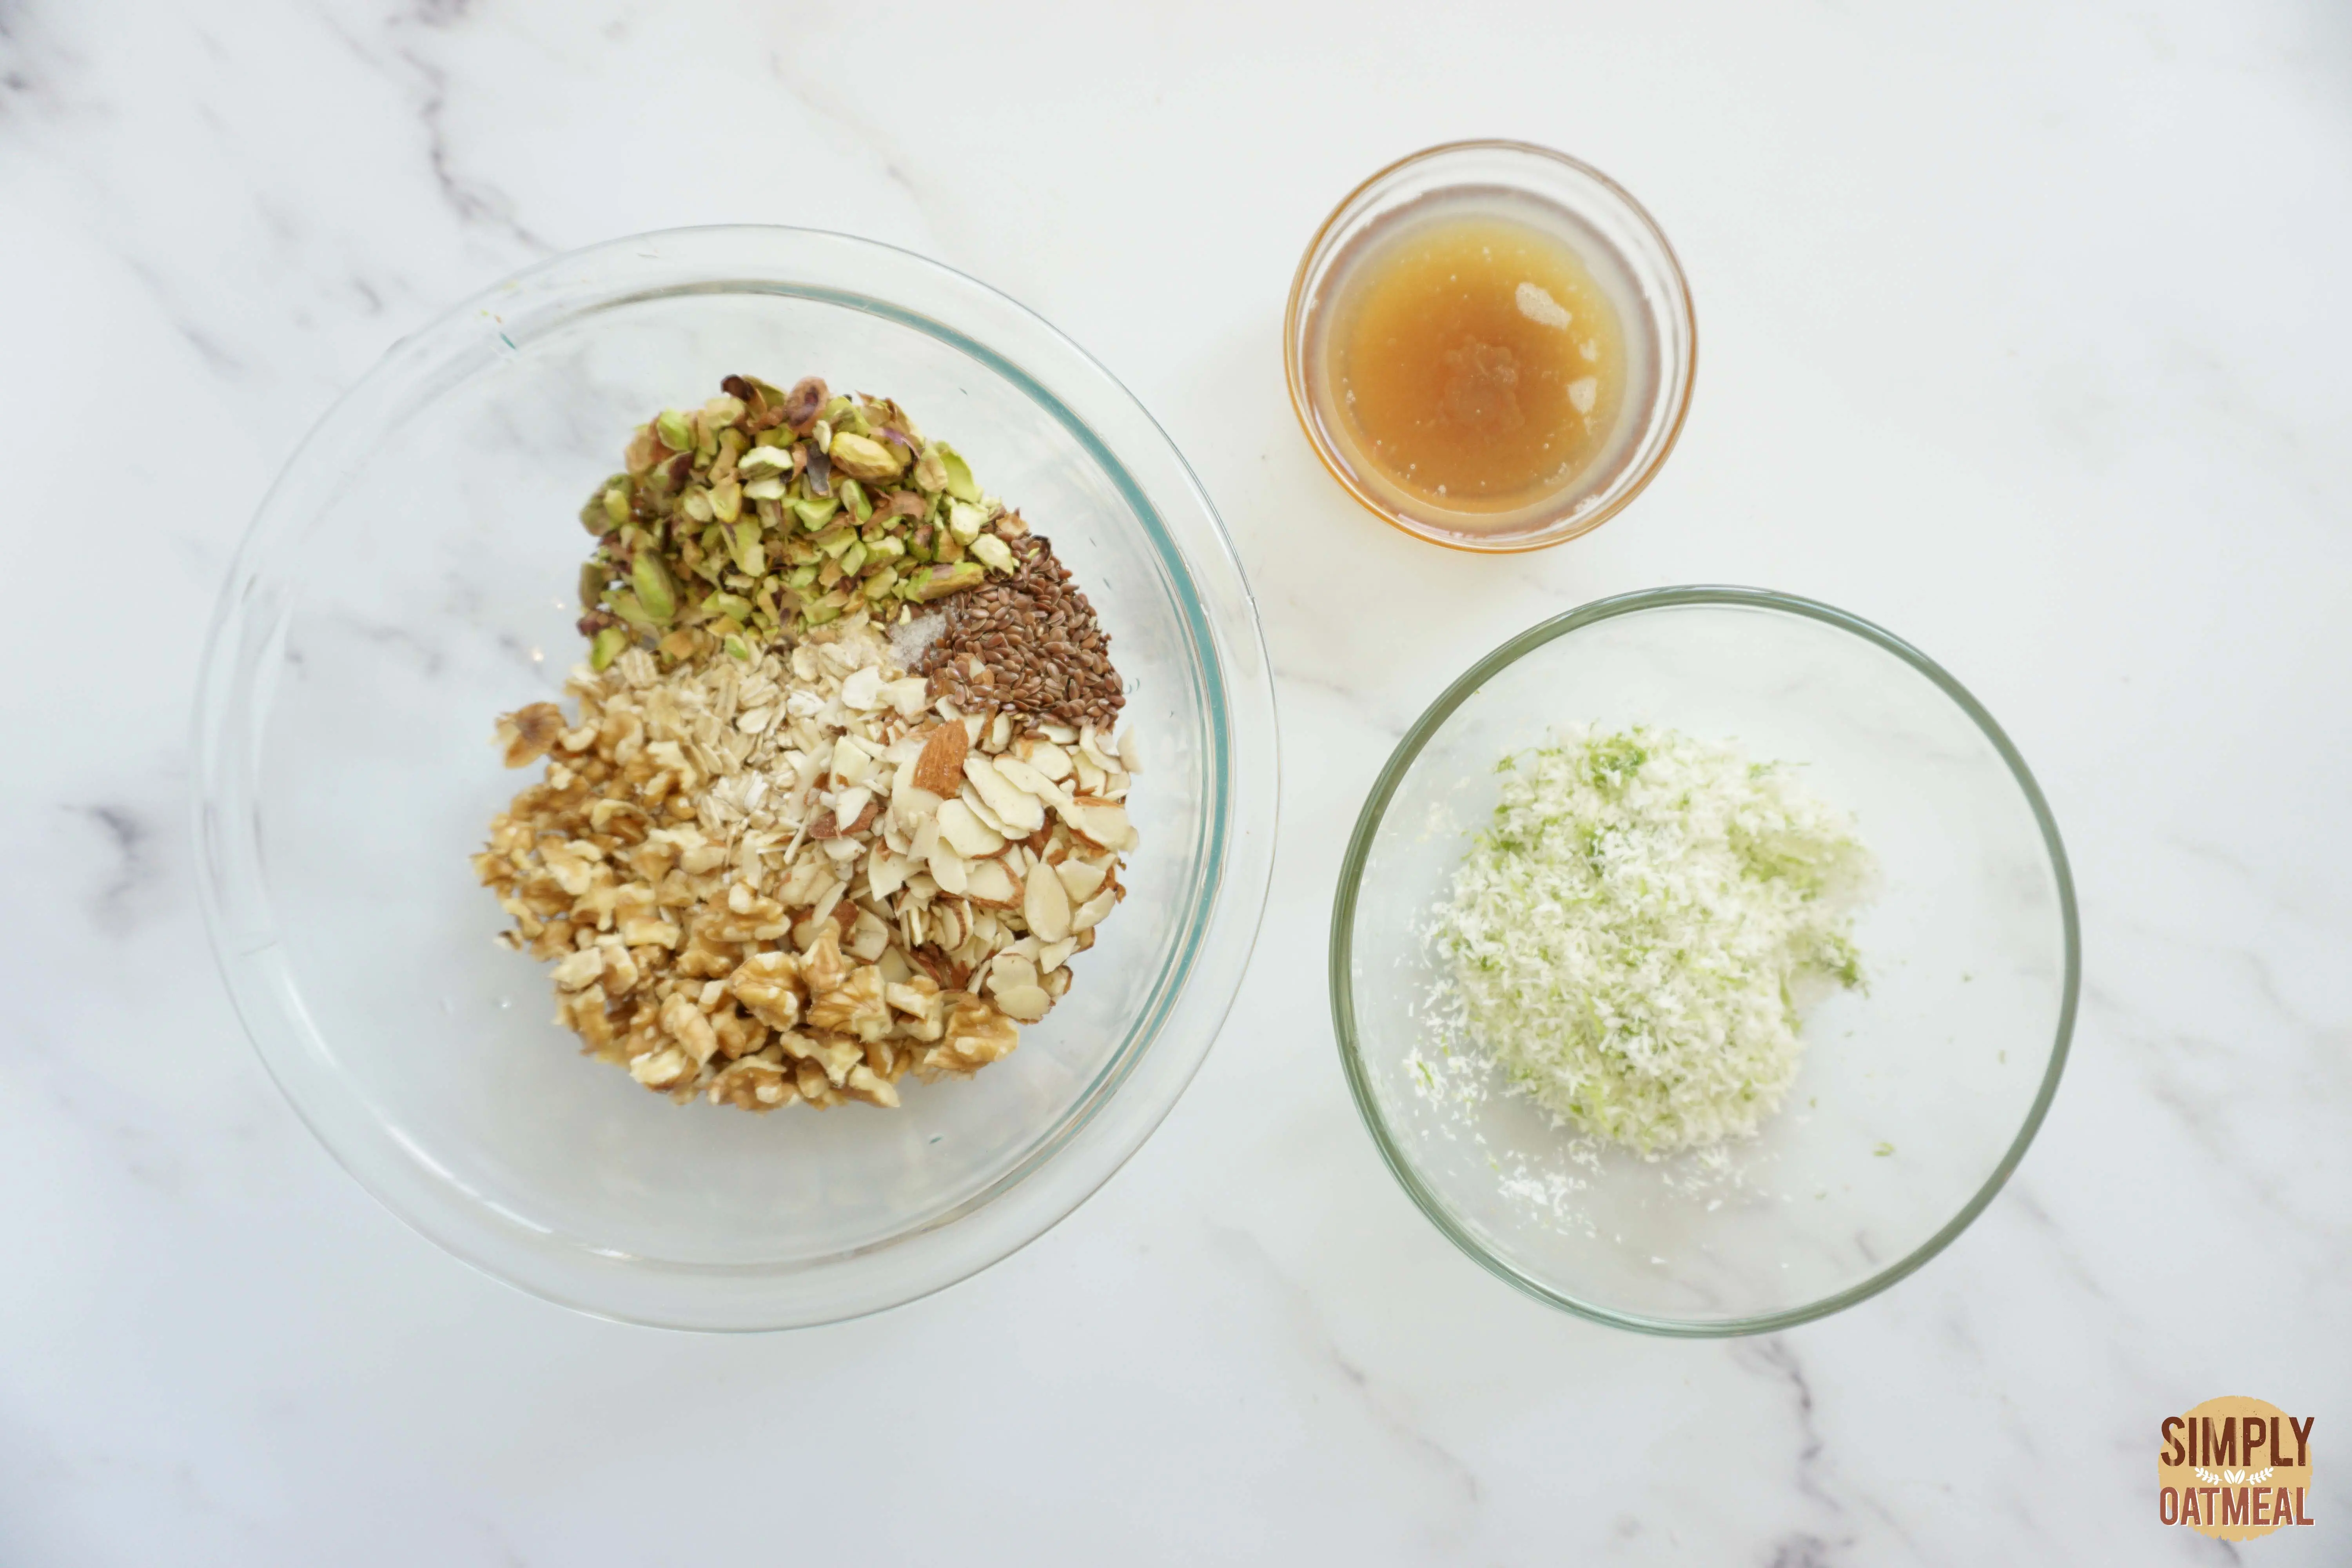 Wet and dry ingredients to make coconut lime pineapple granola